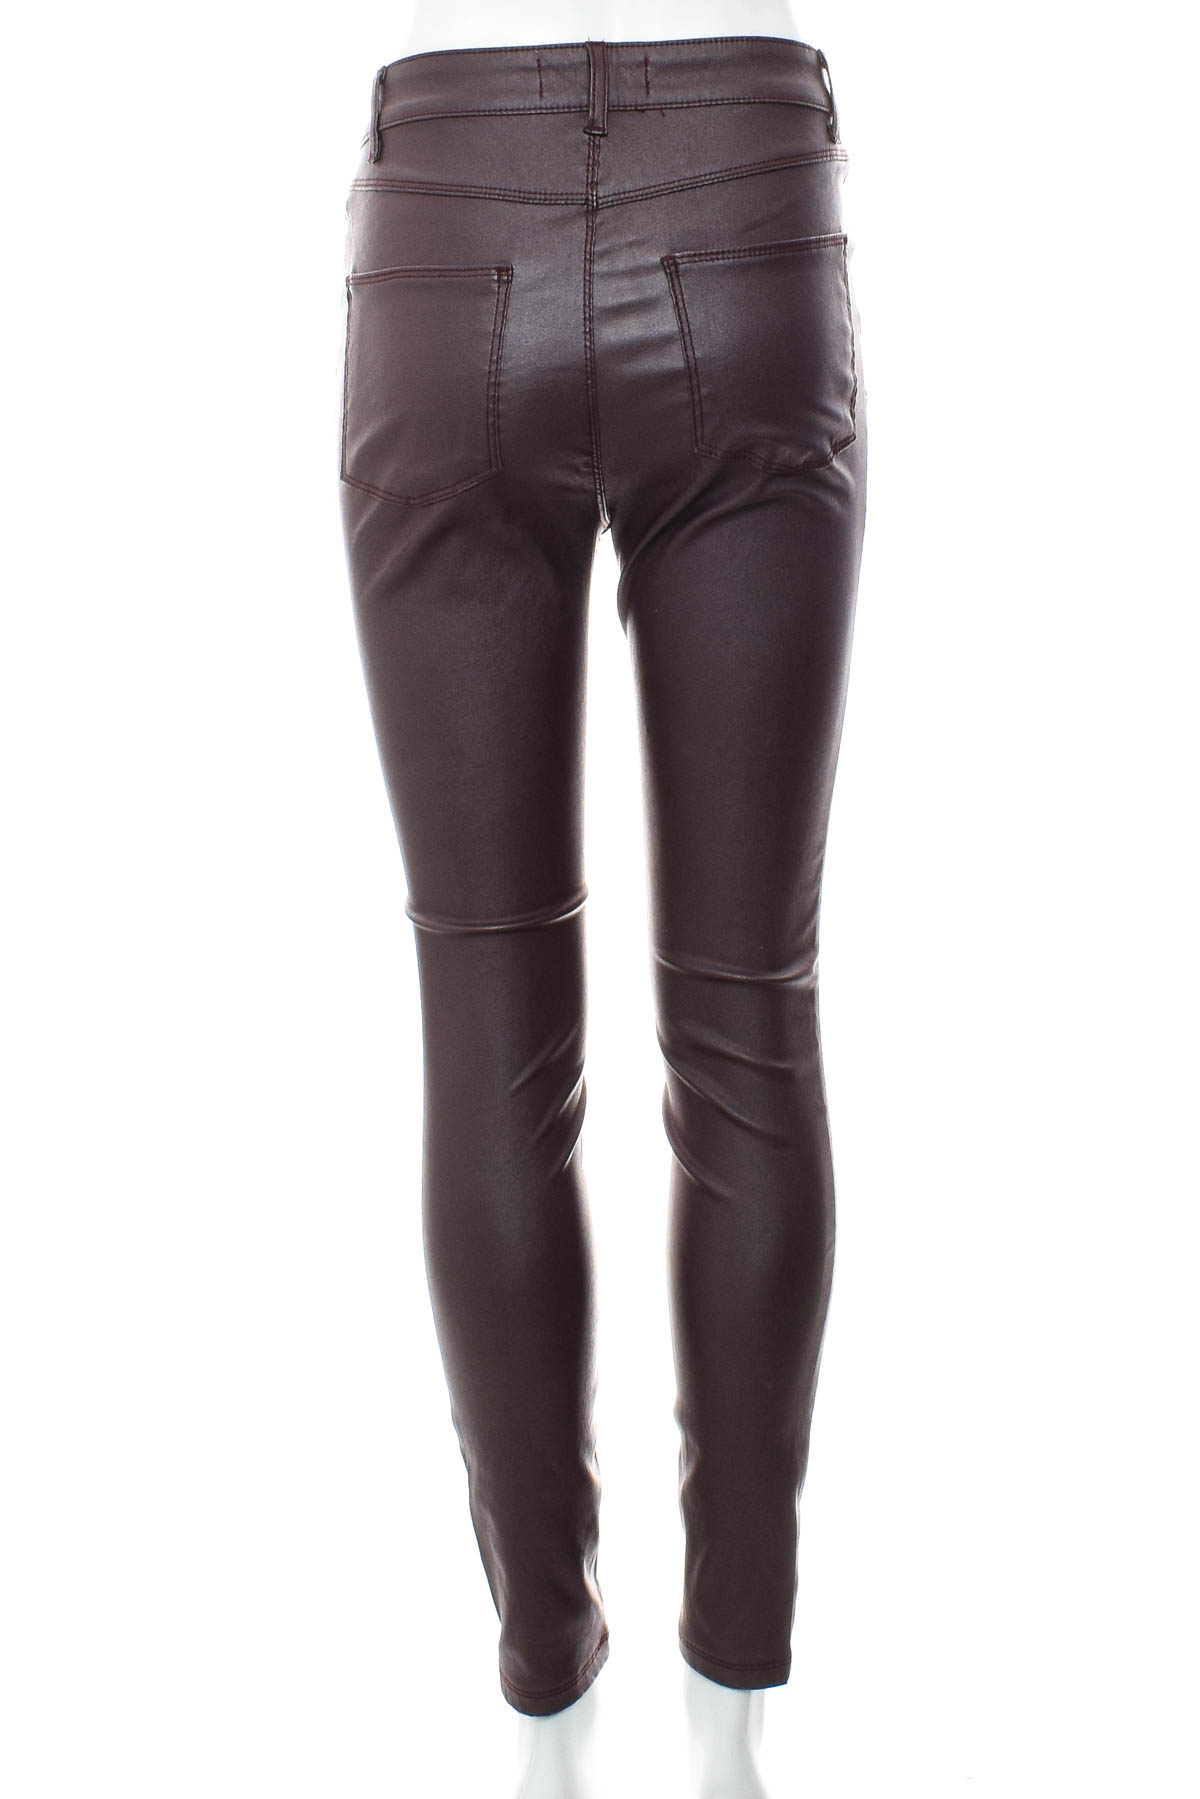 Women's leather trousers - PRIMARK - 1